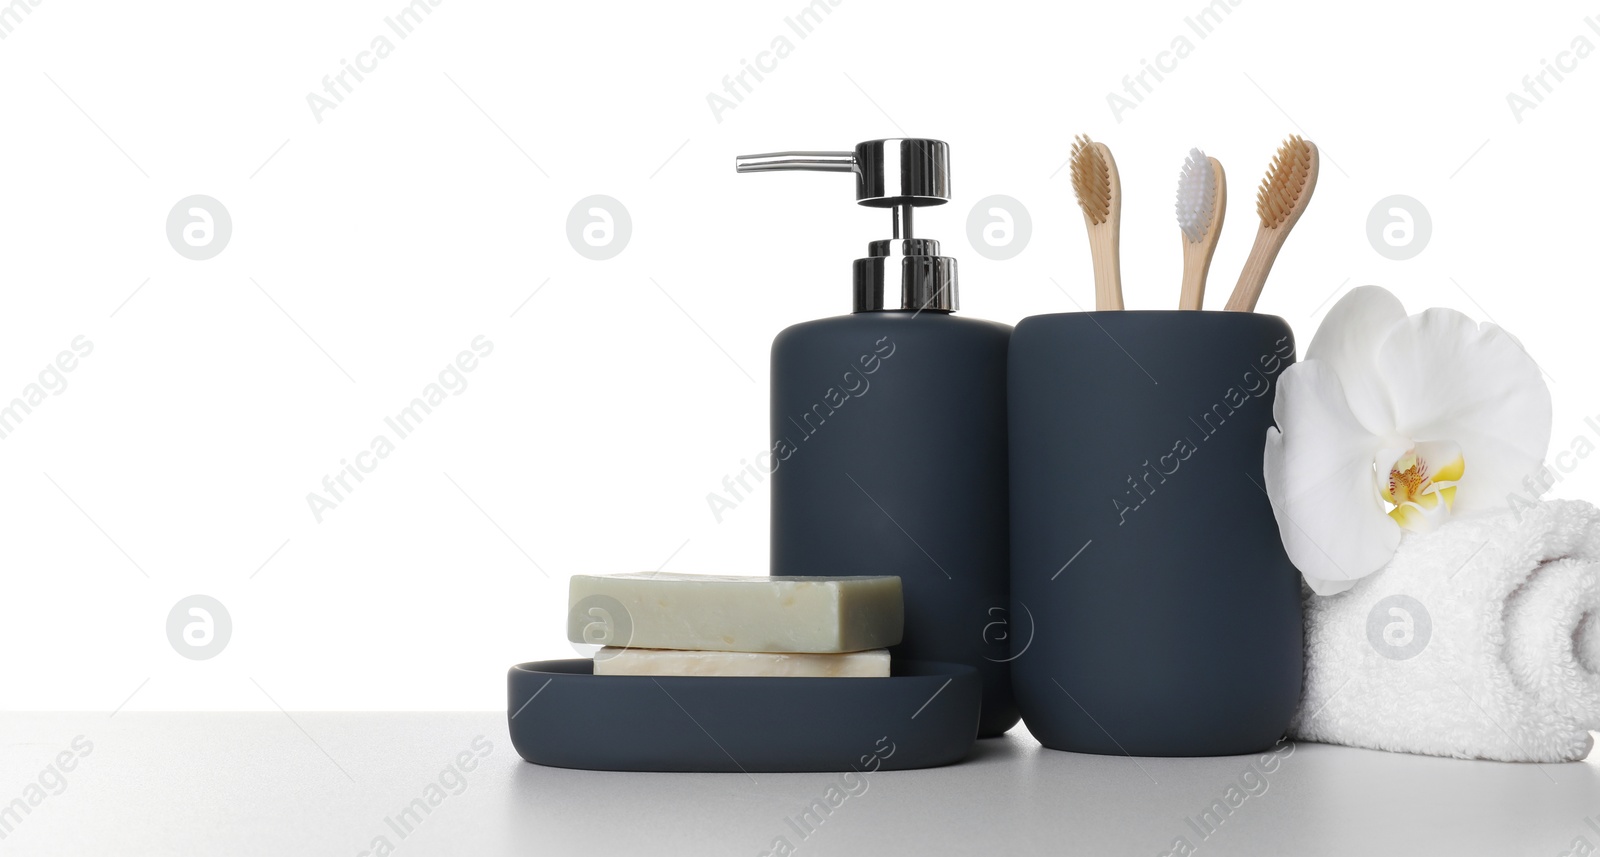 Photo of Bath accessories. Different personal care products and flower on table against white background. Space for text